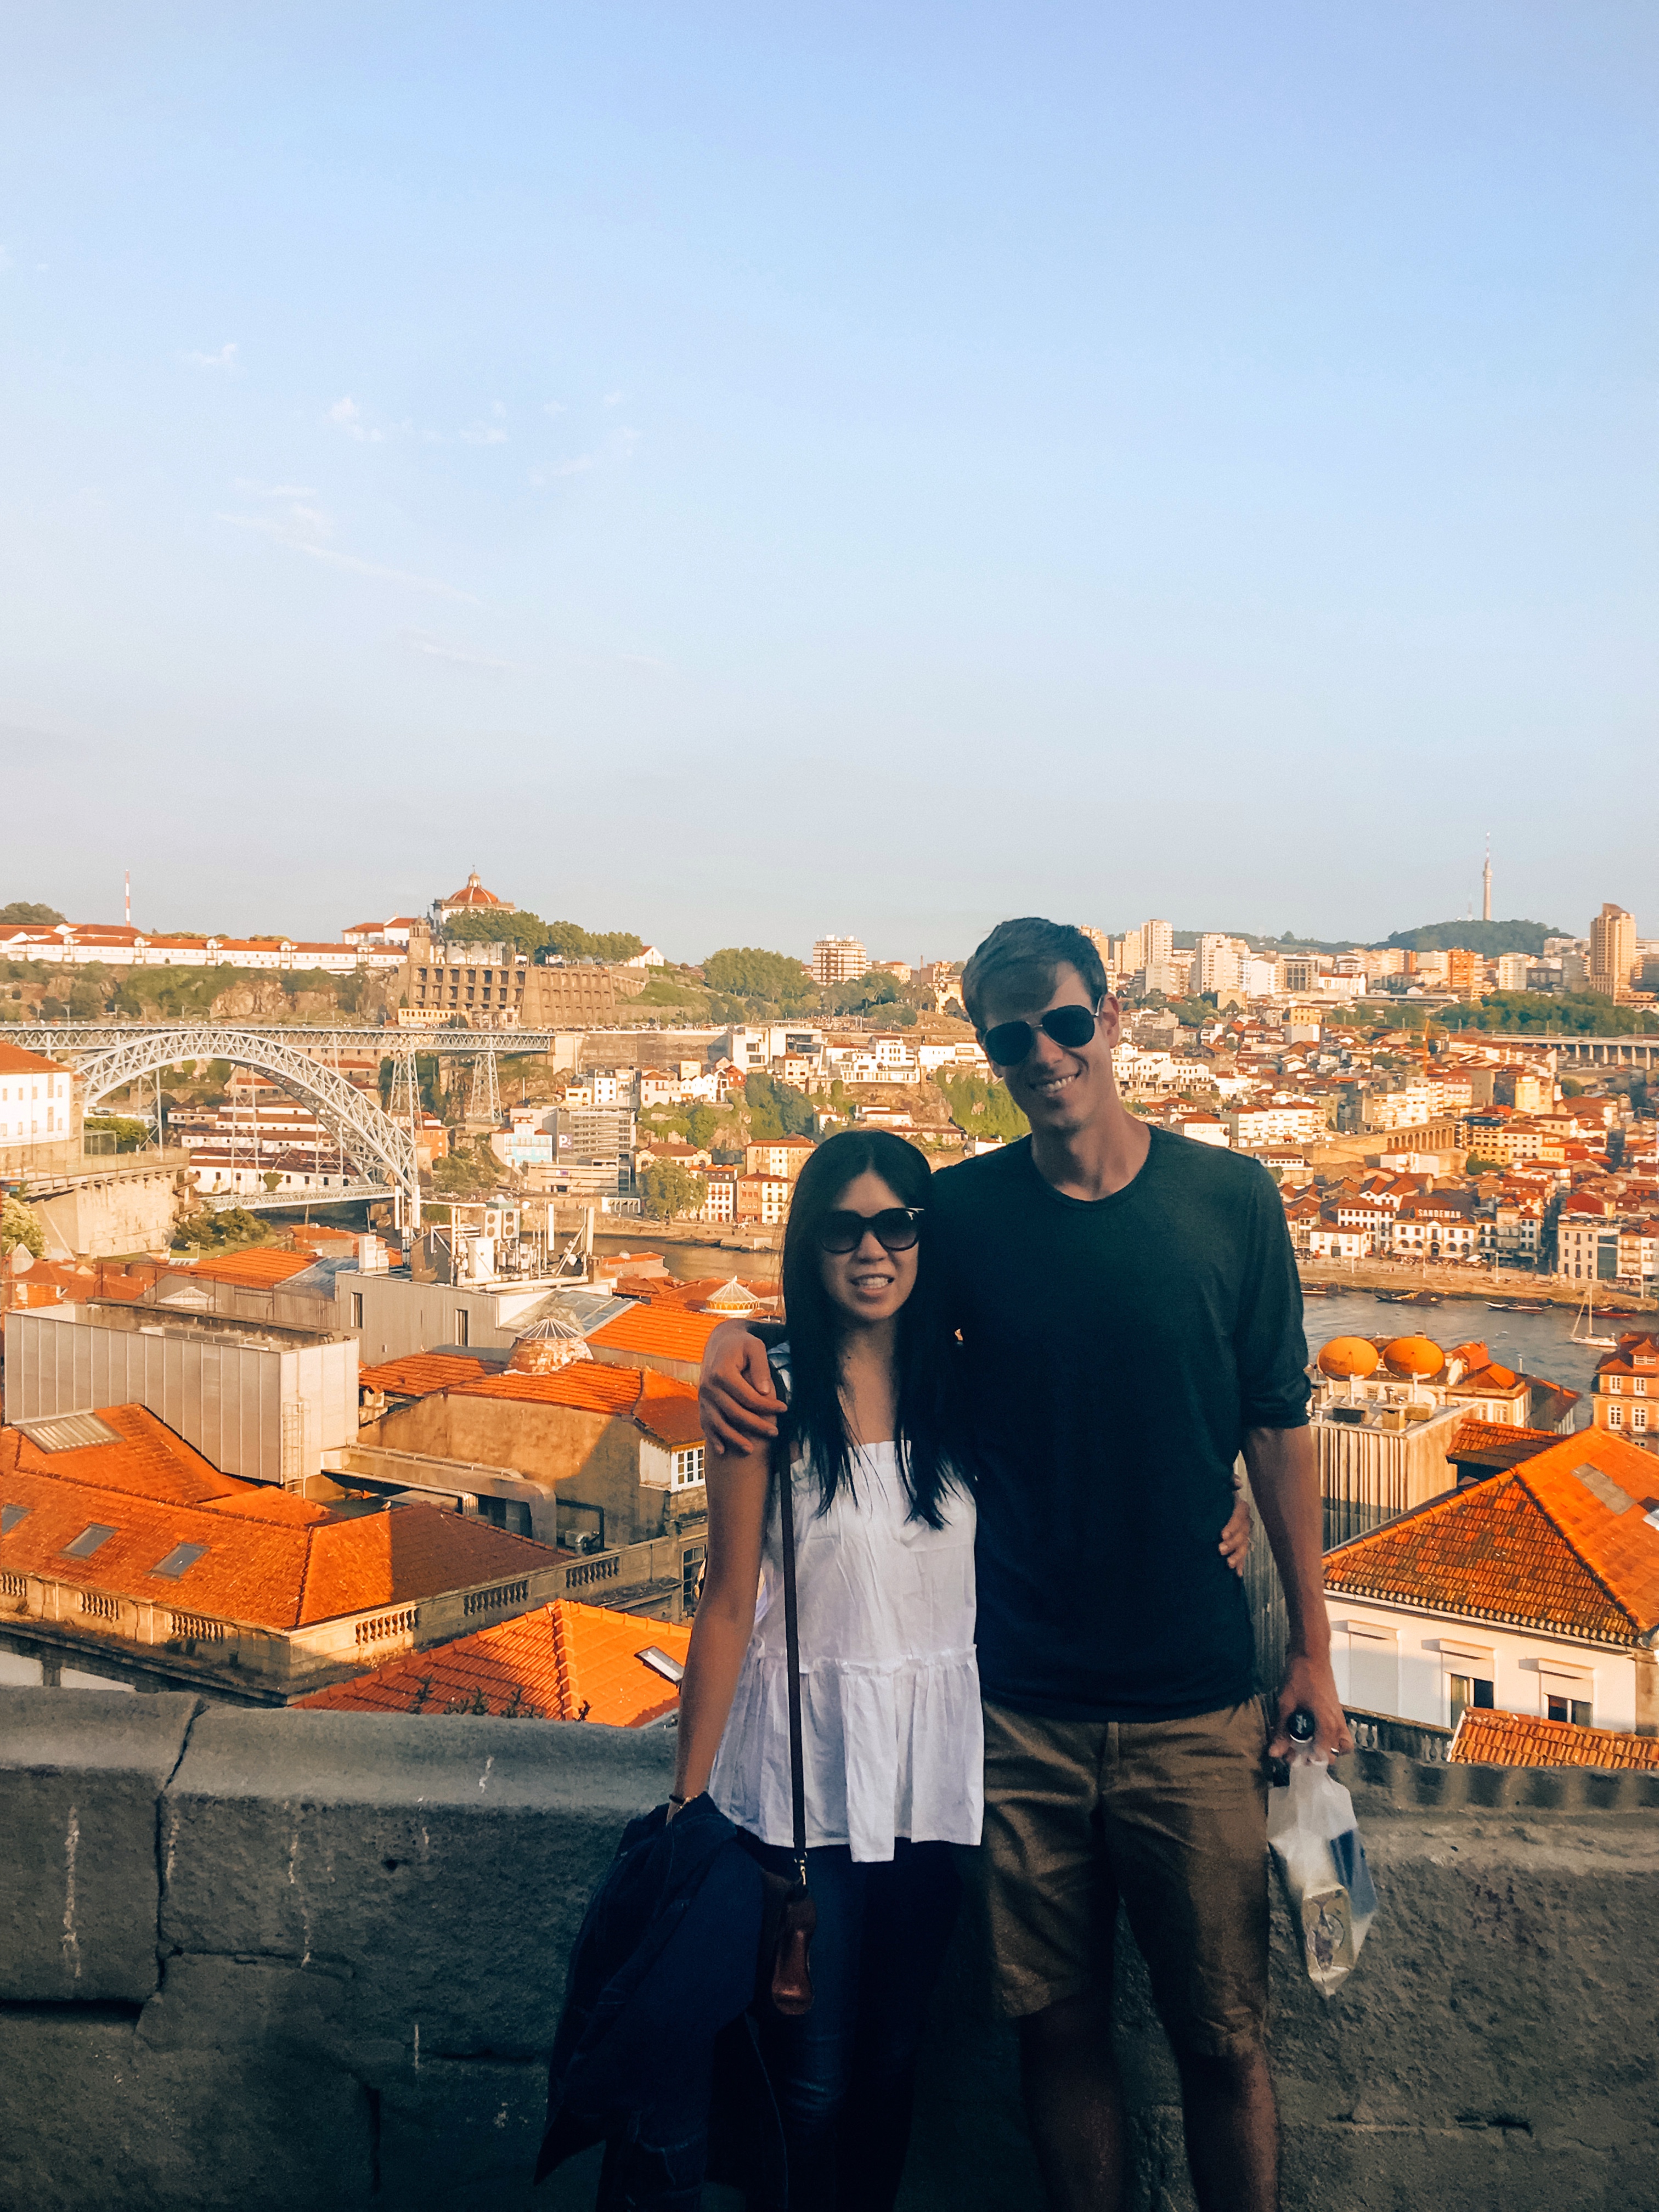 Another great sunset viewpoint option is the Miradouro Da Serra Do Pilar, which you can get to after crossing the Luis I Bridge.